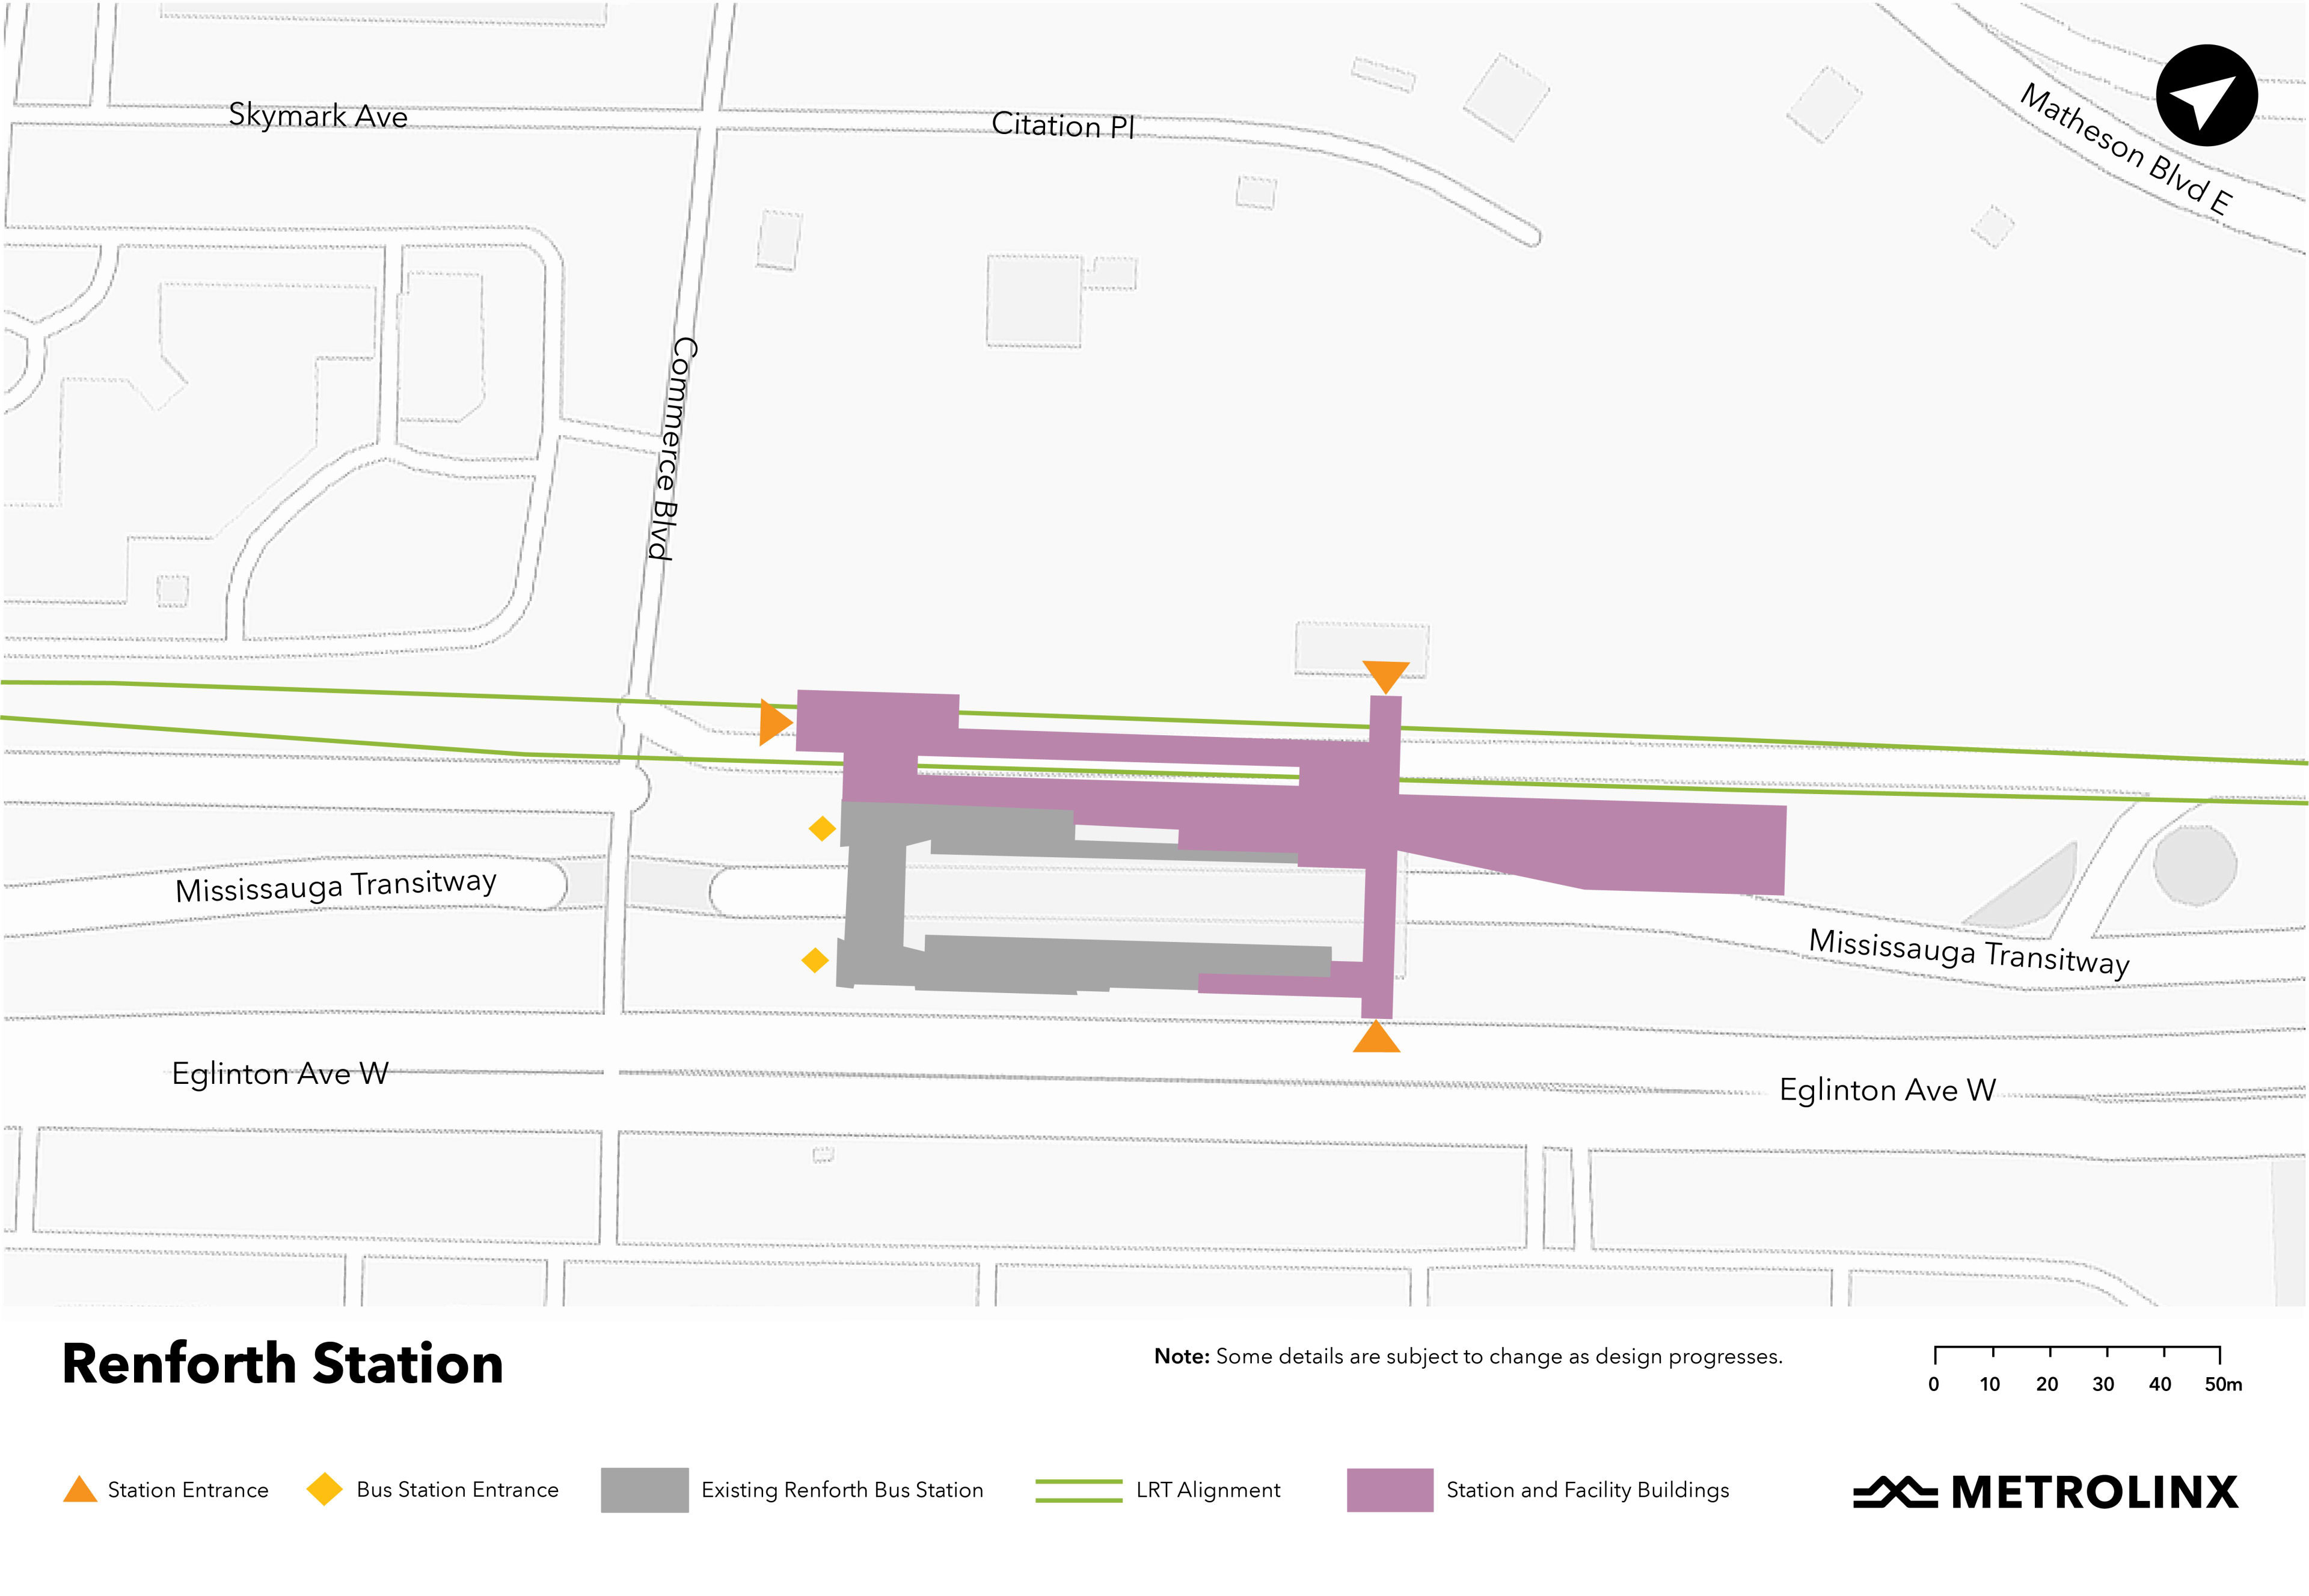 A map of the area around Renforth Station showing future Eglinton Crosstown West Extension upgrades